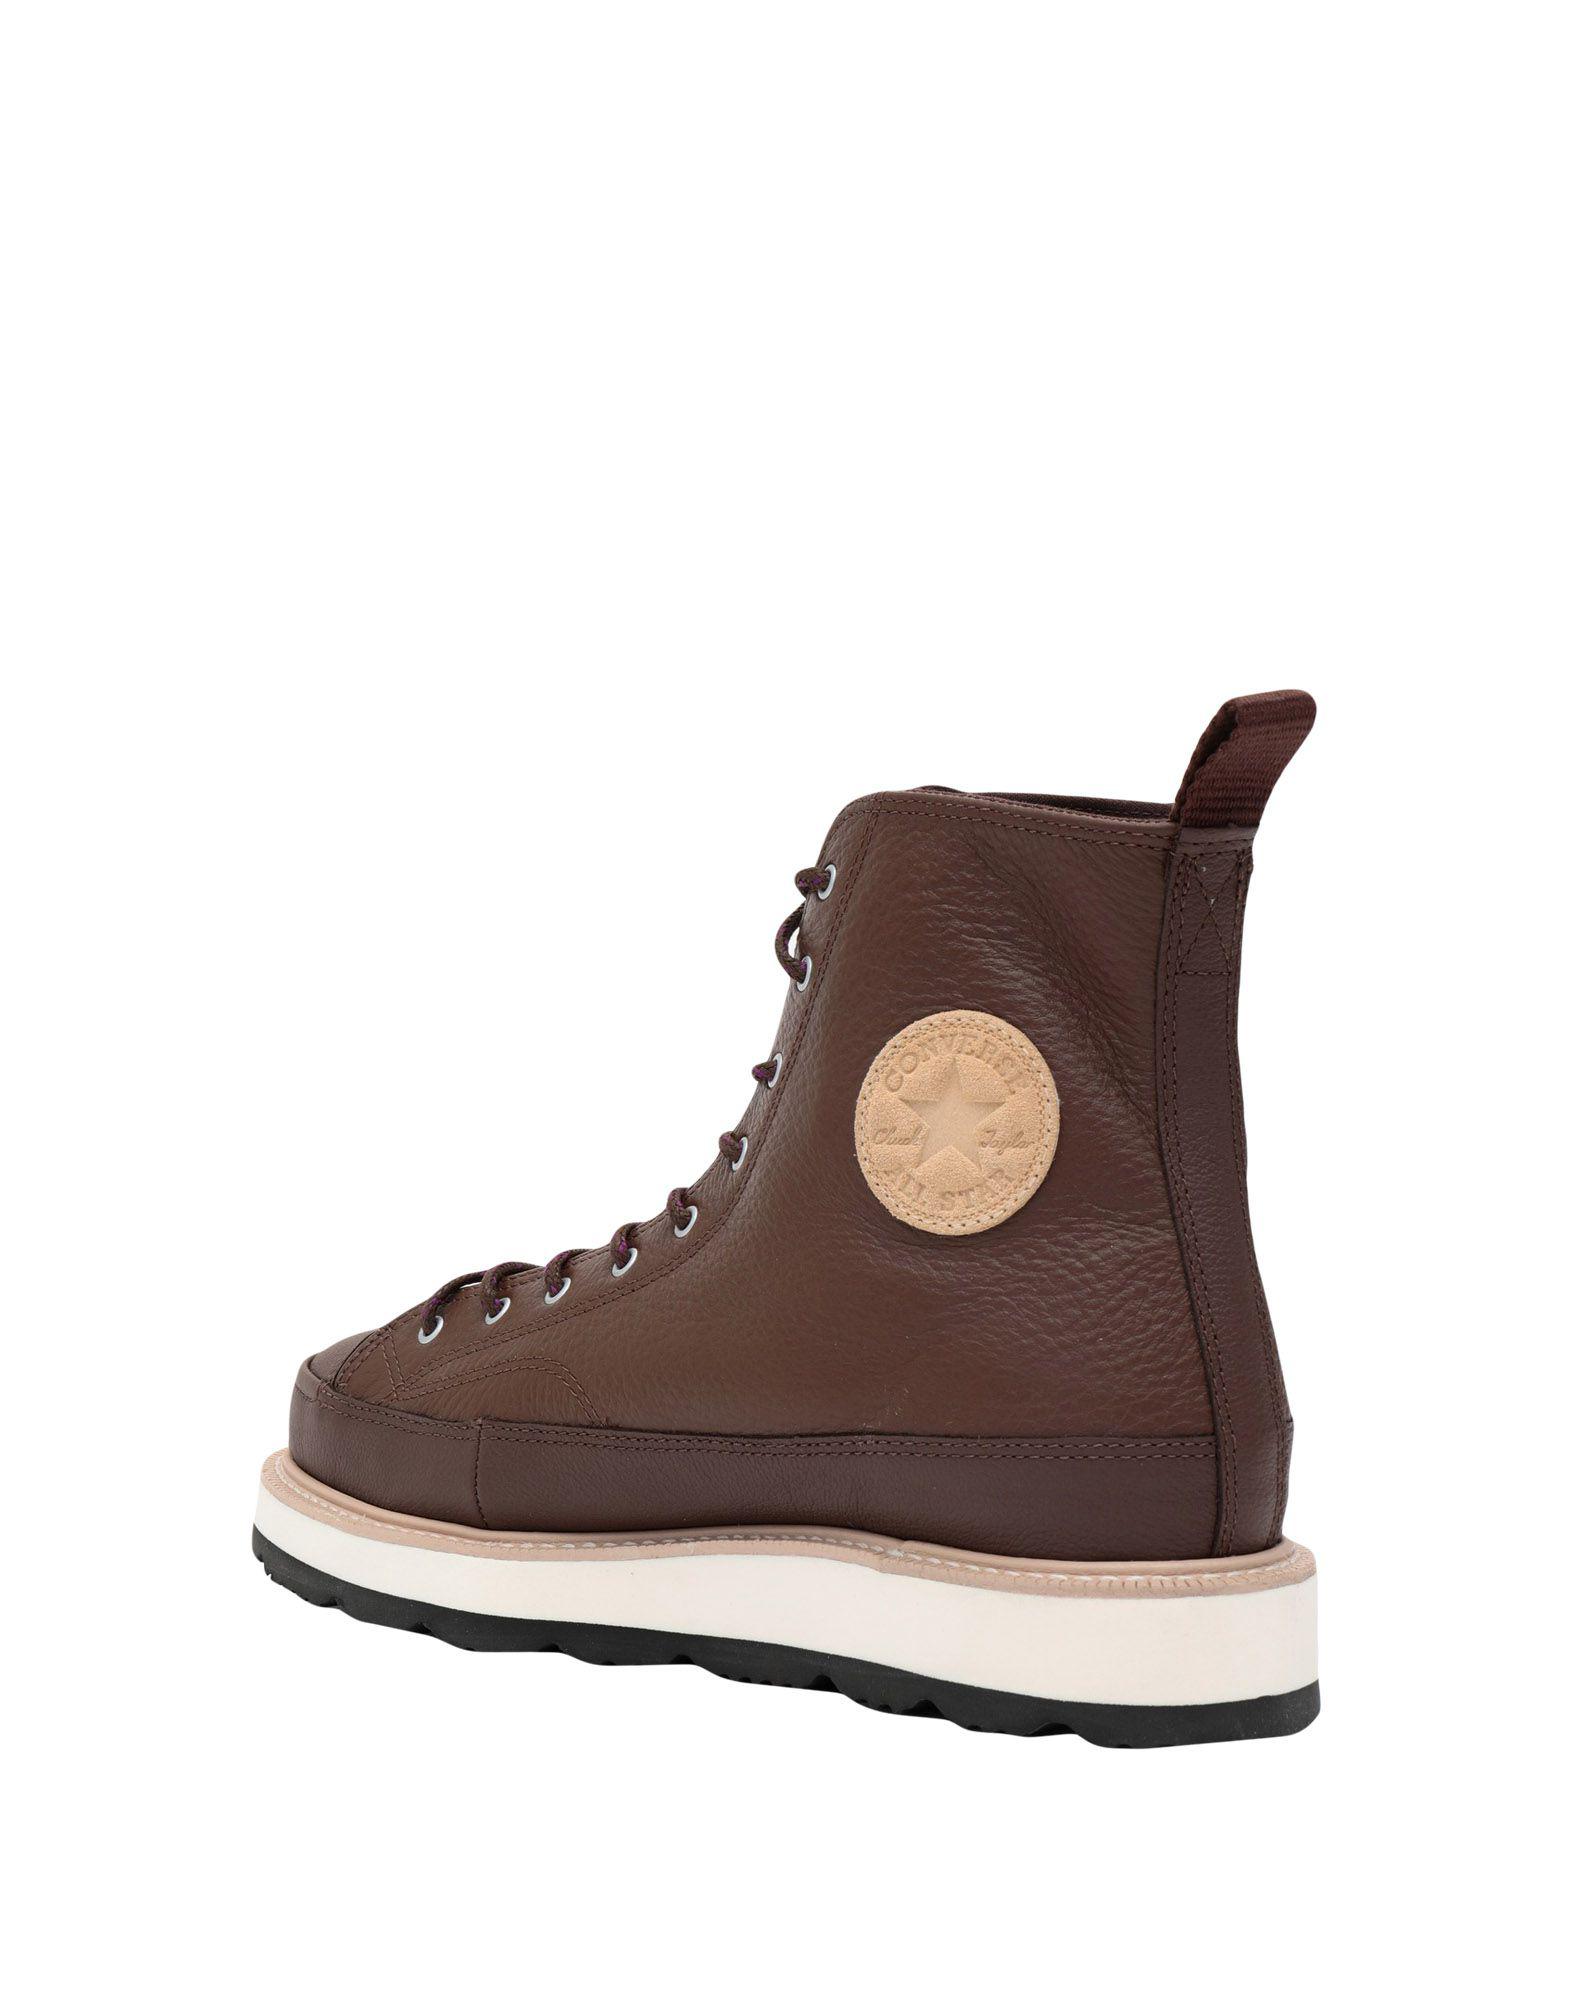 converse leather ankle boots Online 